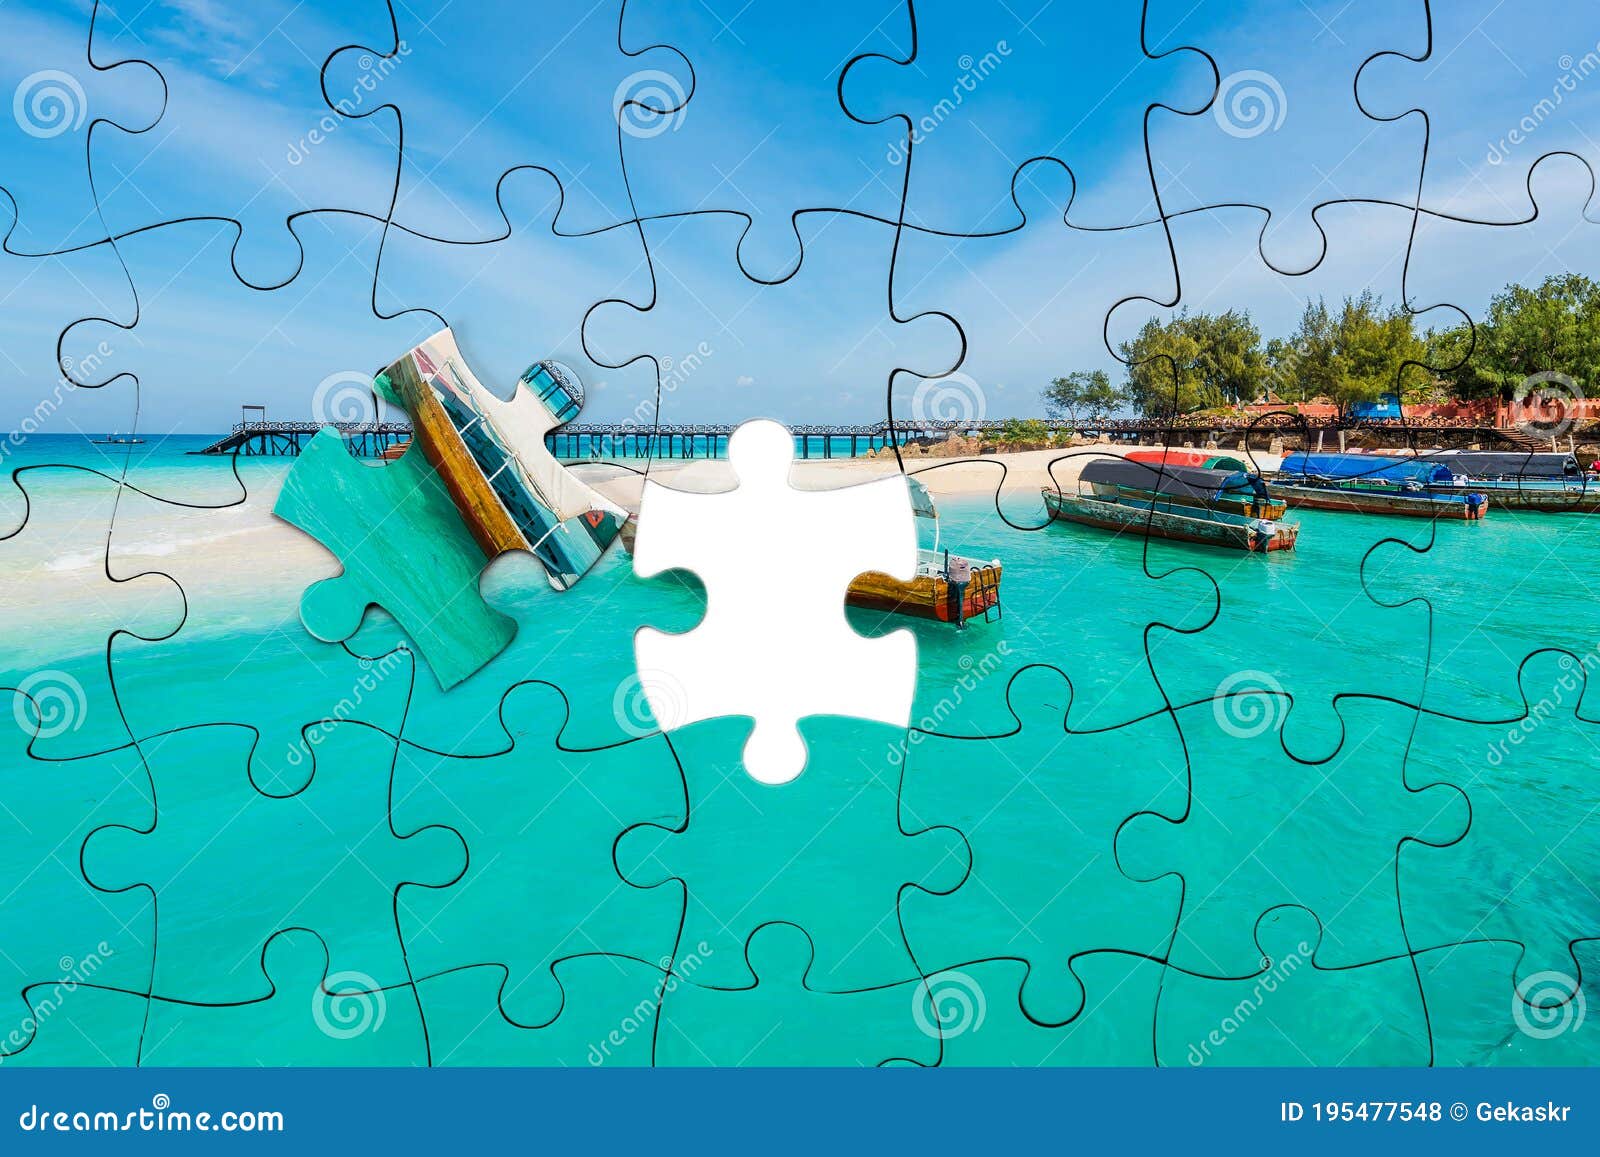 Puzzle with Marine Illustration Stock Photo - Image of concepts, jigsaw ...